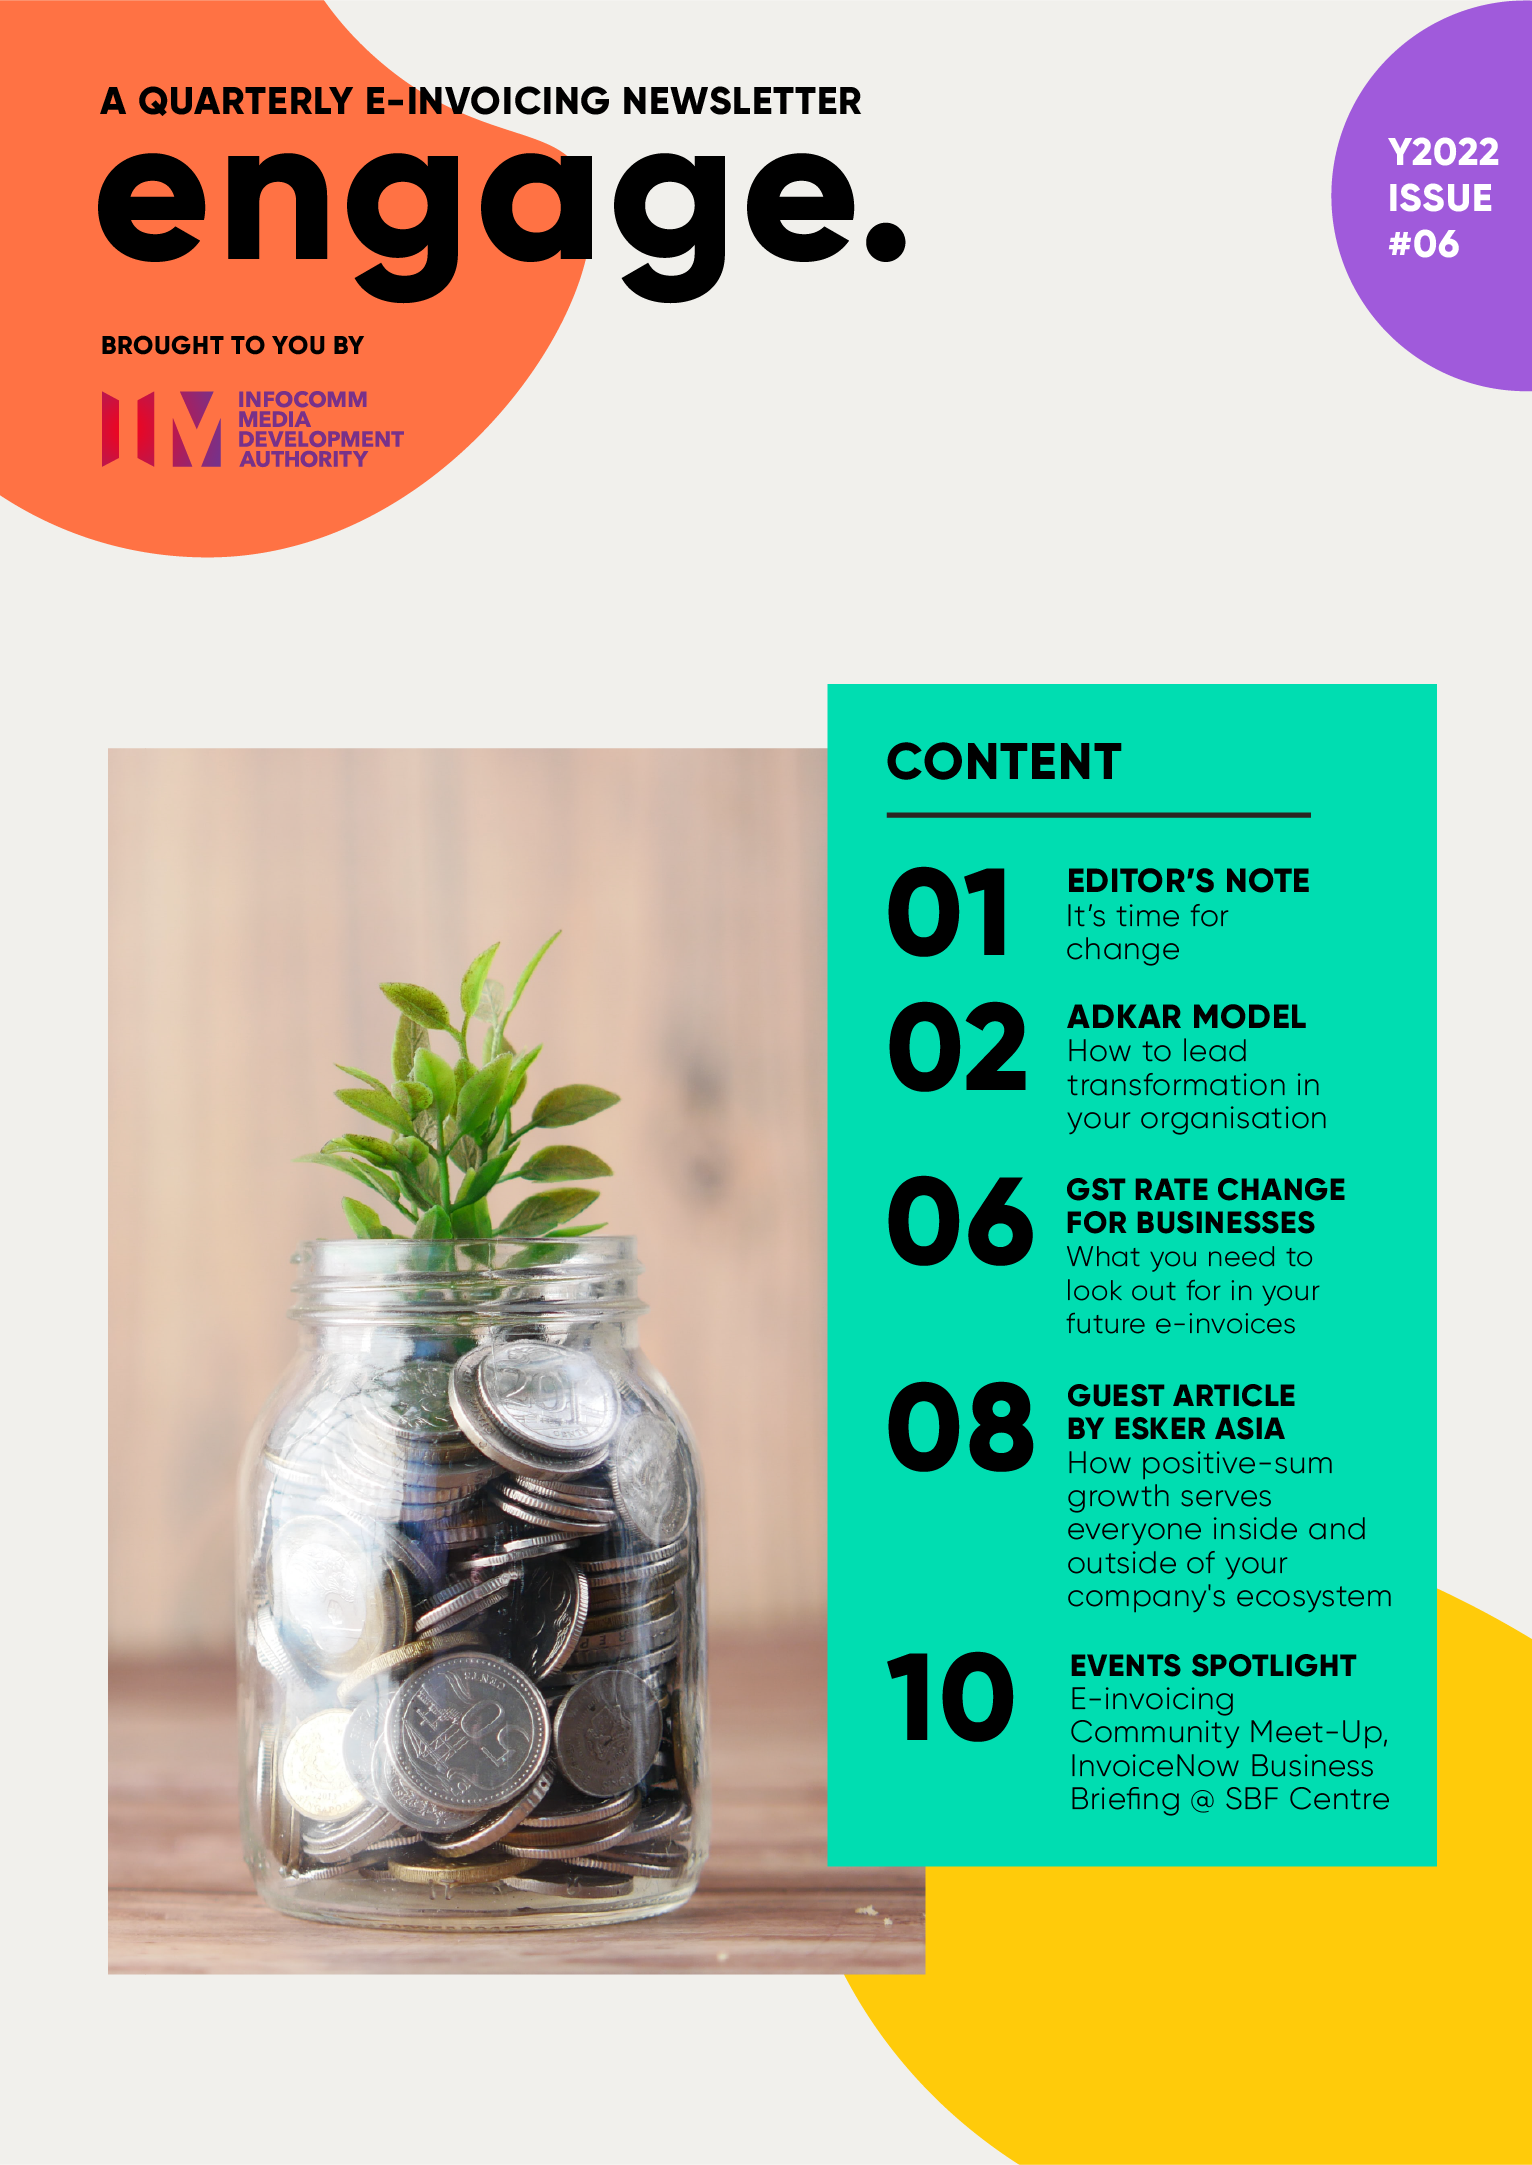 ENGAGE – A Quarterly E-Invoicing Newsletter by IMDA: Y2022 ISSUE #06